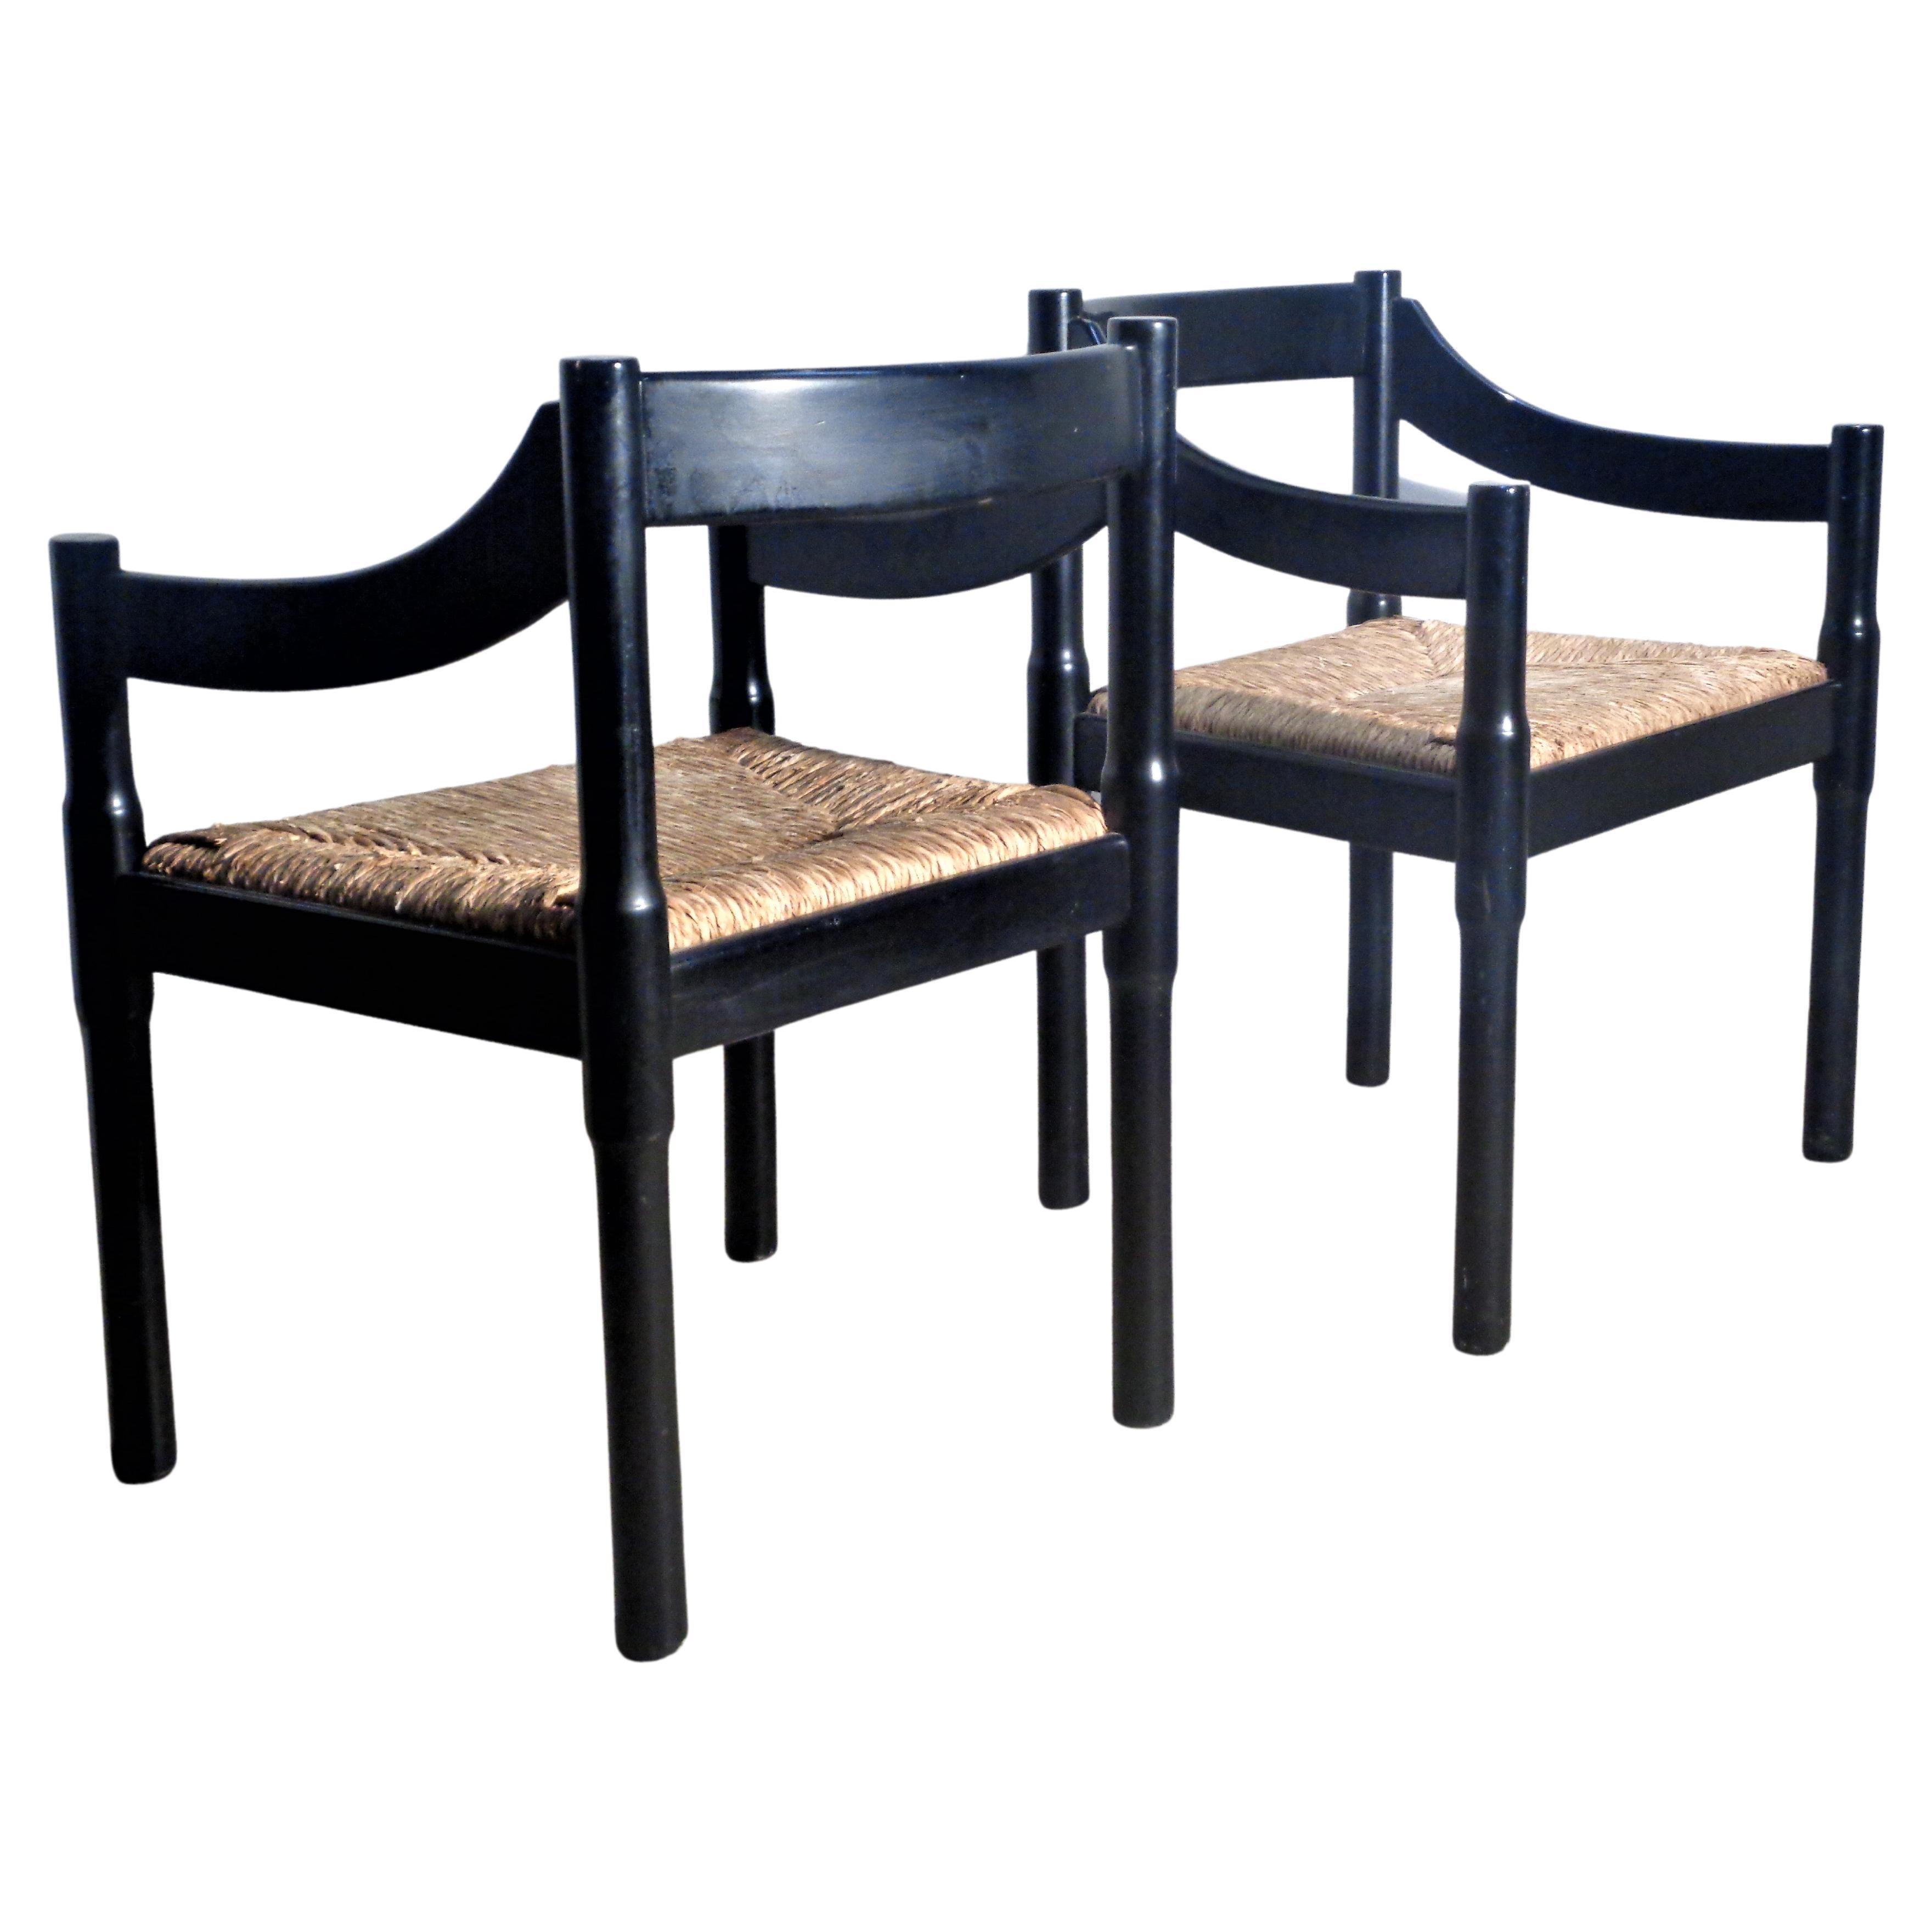 Vico Magistretti 'Carimate' Chairs - Made in Italy, 1960's